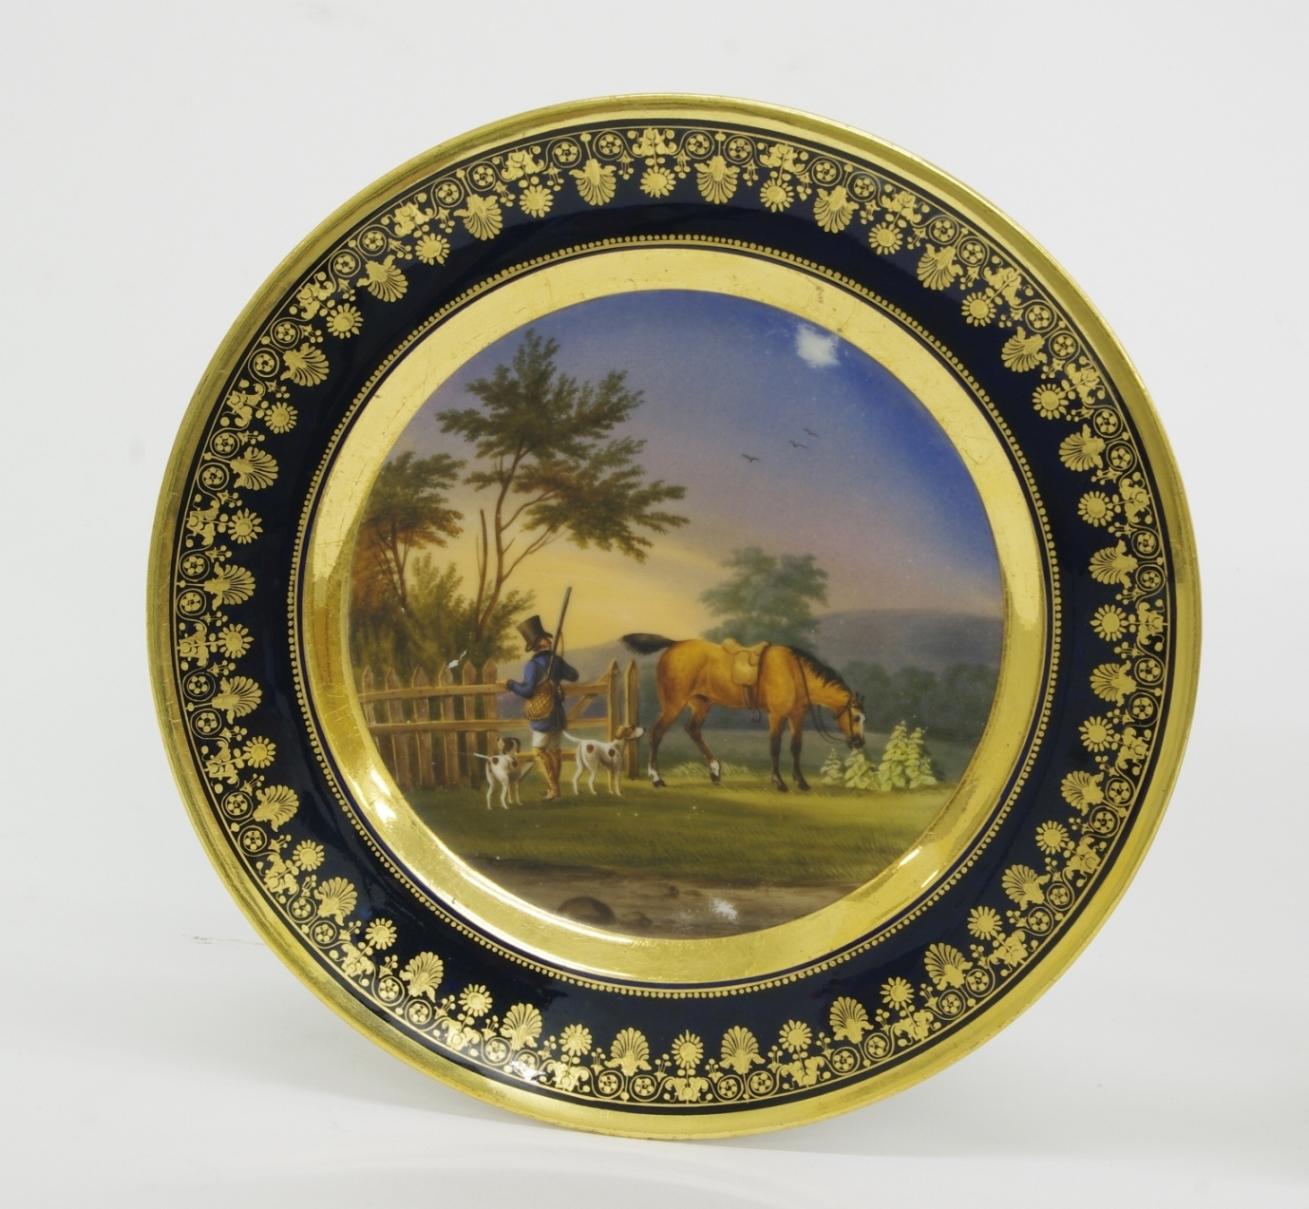 Fine pair of old pairs porcelain cabinet plates, each painted with an equestrian hunt scene within a wide gold band; the cobalt border well gilded with neoclassical motifs of anthemions and flowers. Signed in black, Schoelcher.

Marc Schoelcher